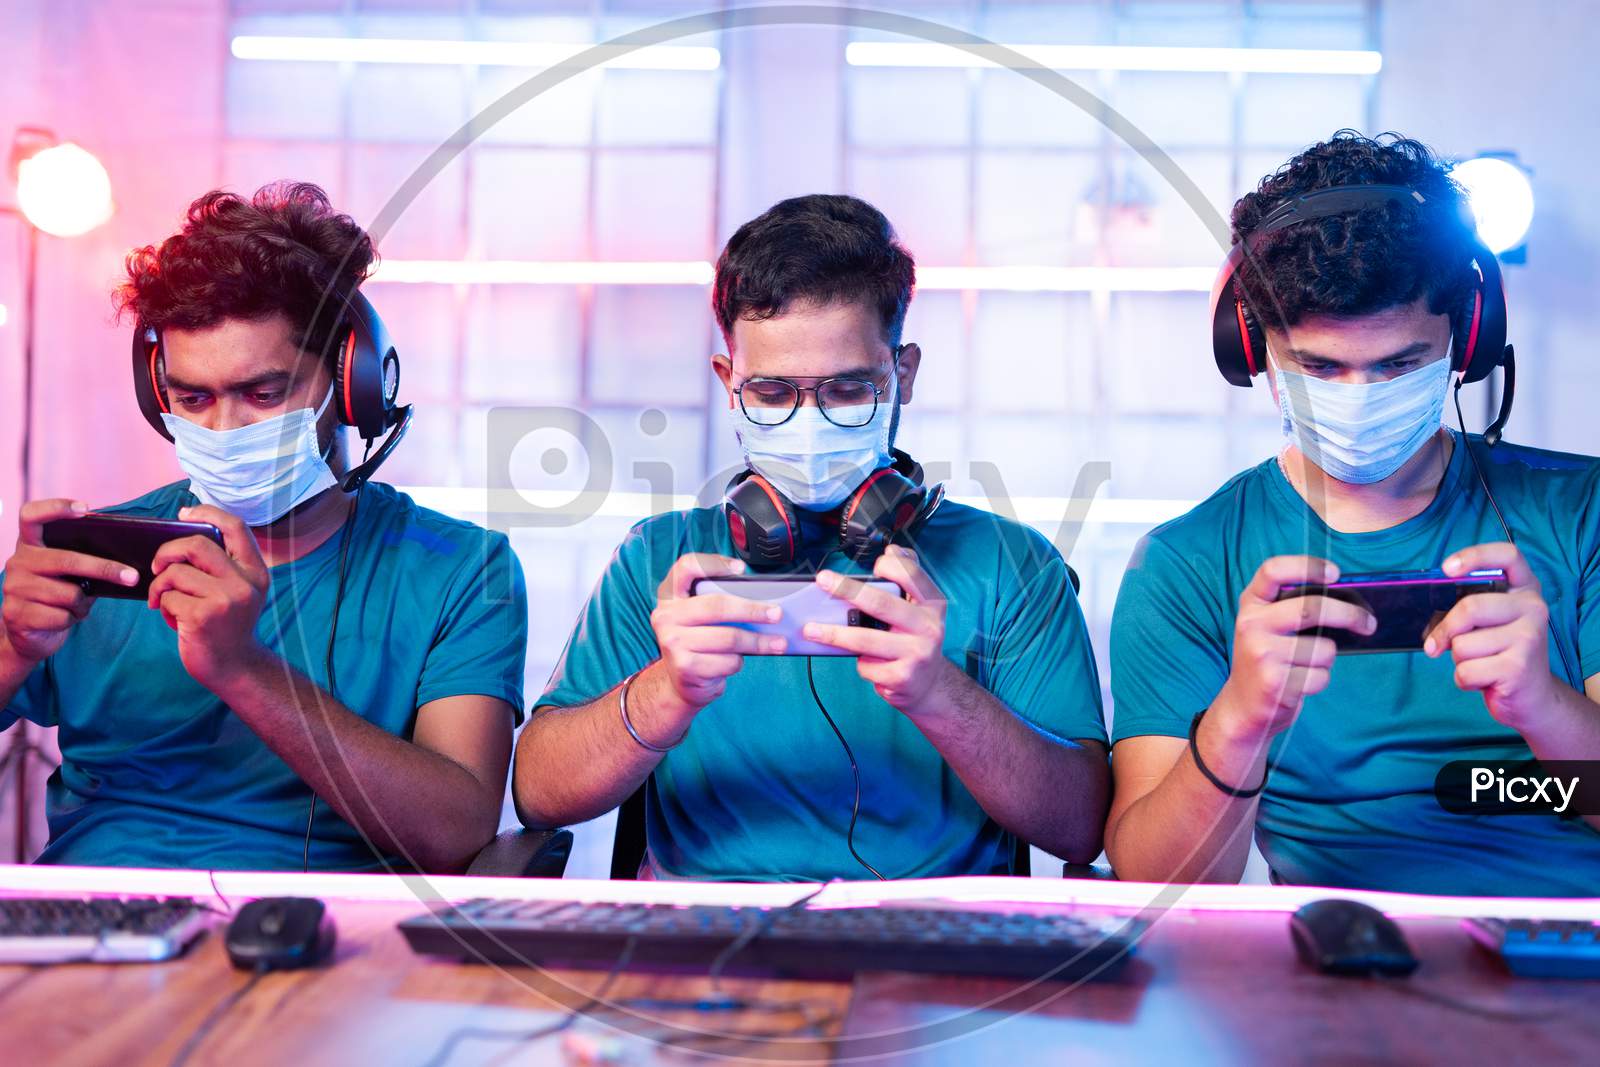 Group Of Gamers With Medical Face Mask Playing Video Game On Mobile Phone At Esports League Or Tournament During Coronavirus Or Covid-19 With Safety Measures.